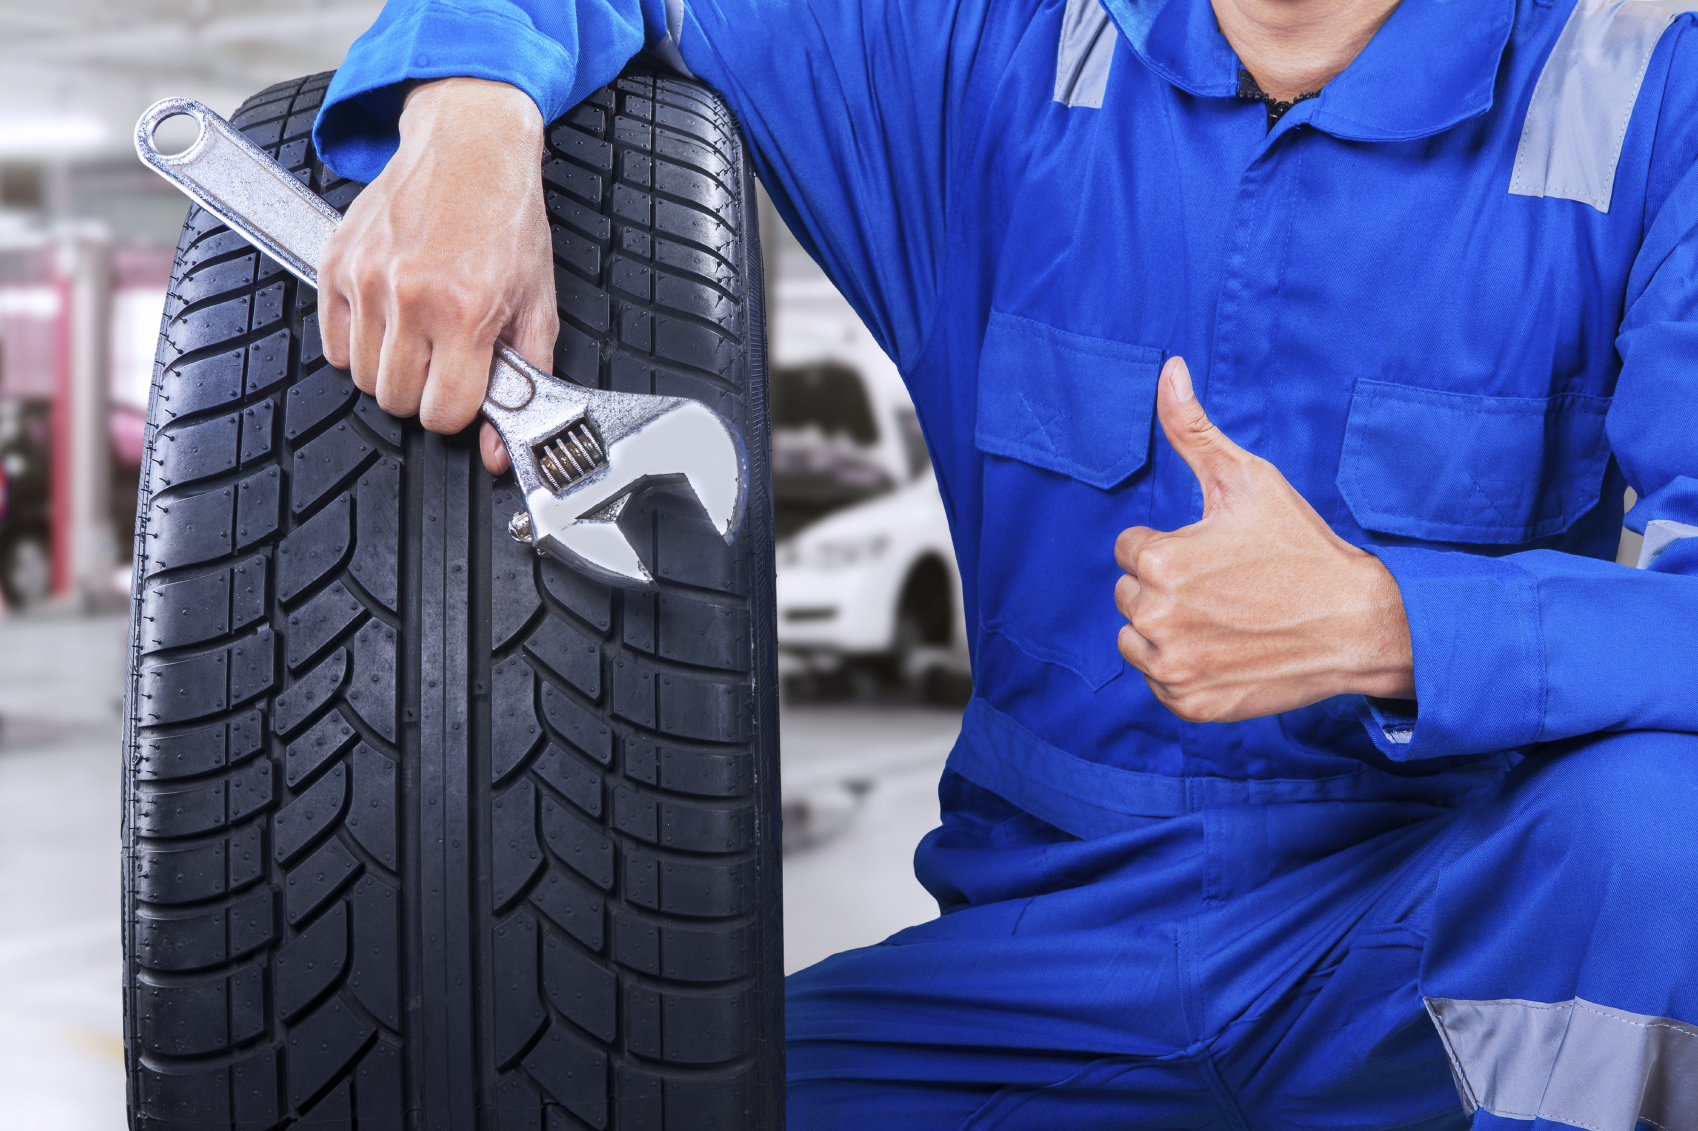 find new auto repair customers